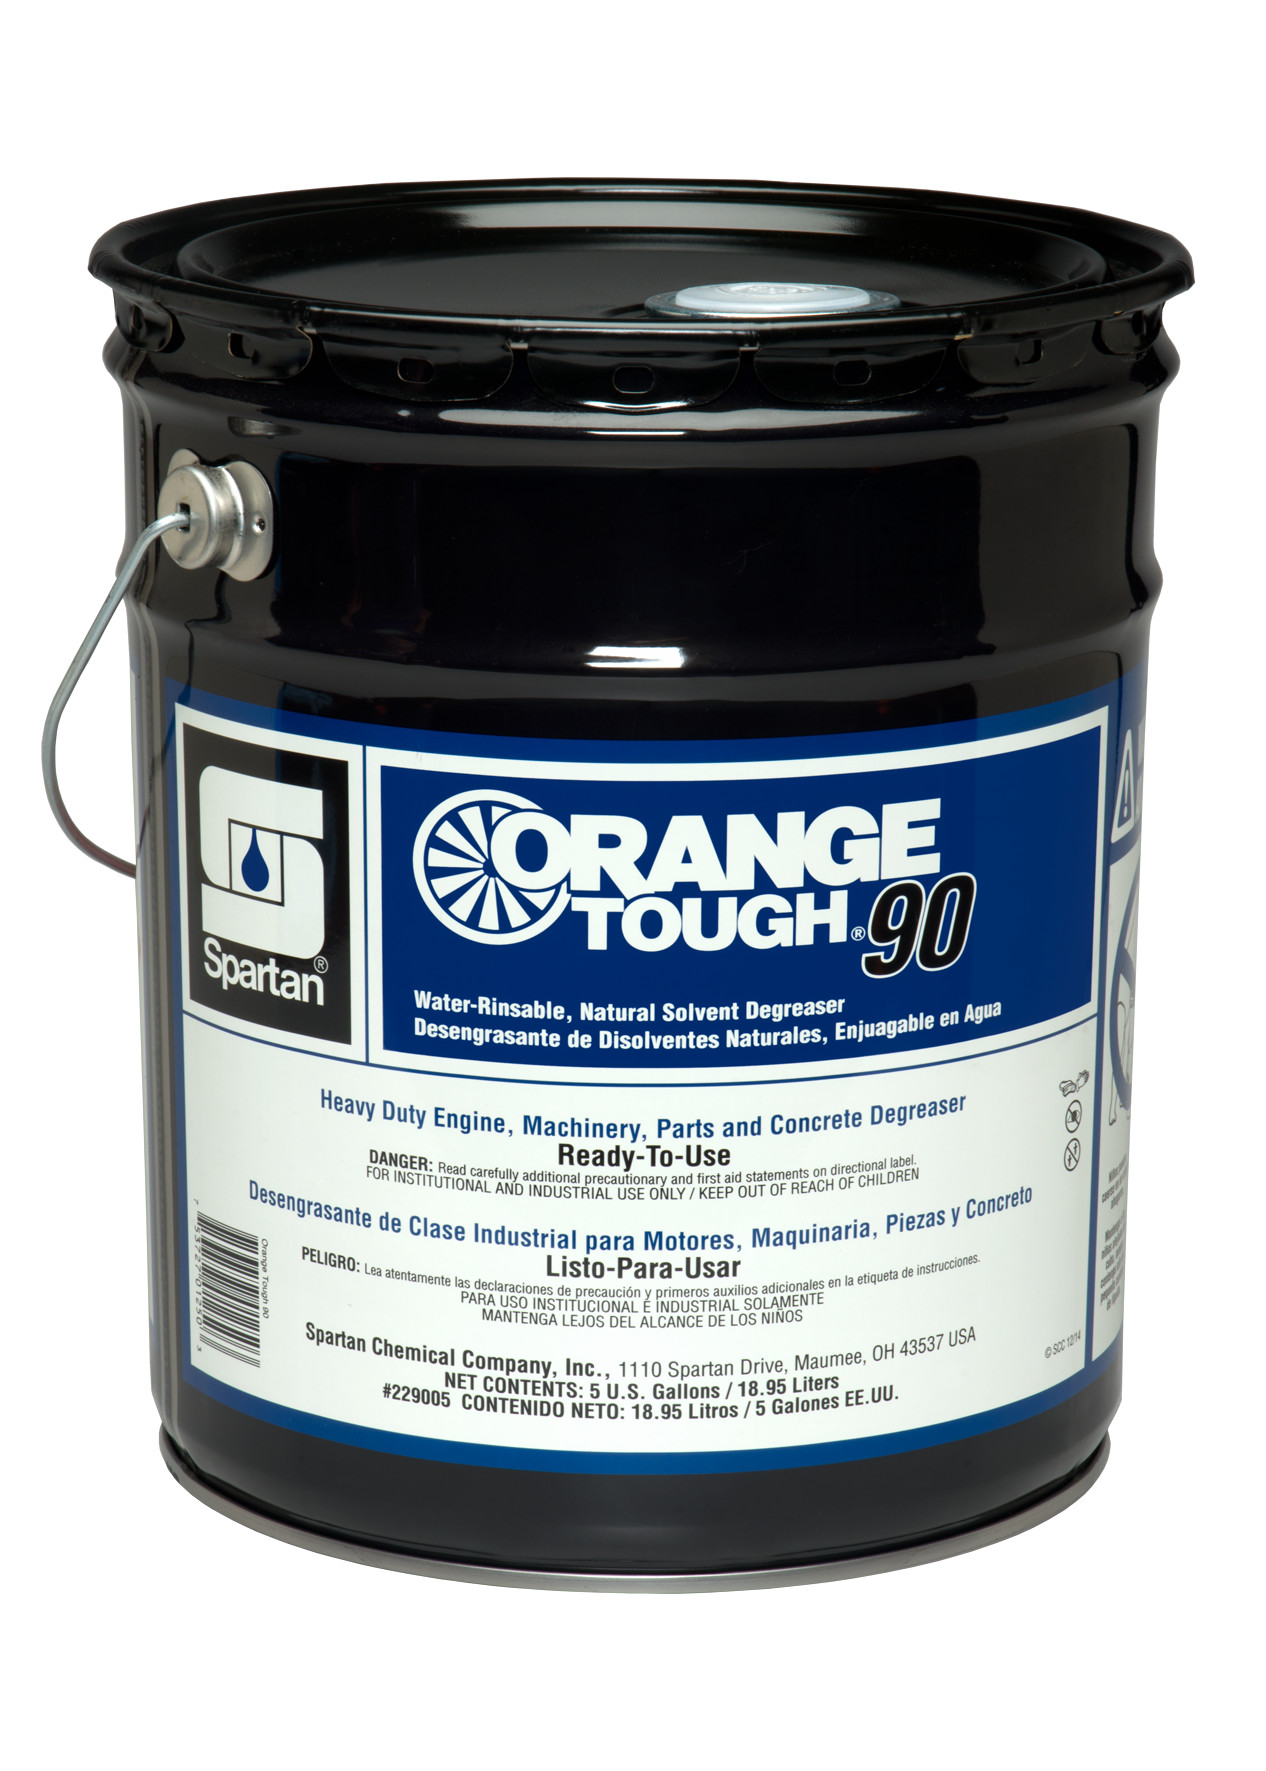 Spartan Chemical Company Orange Tough 90, 5 GAL STEEL LINED